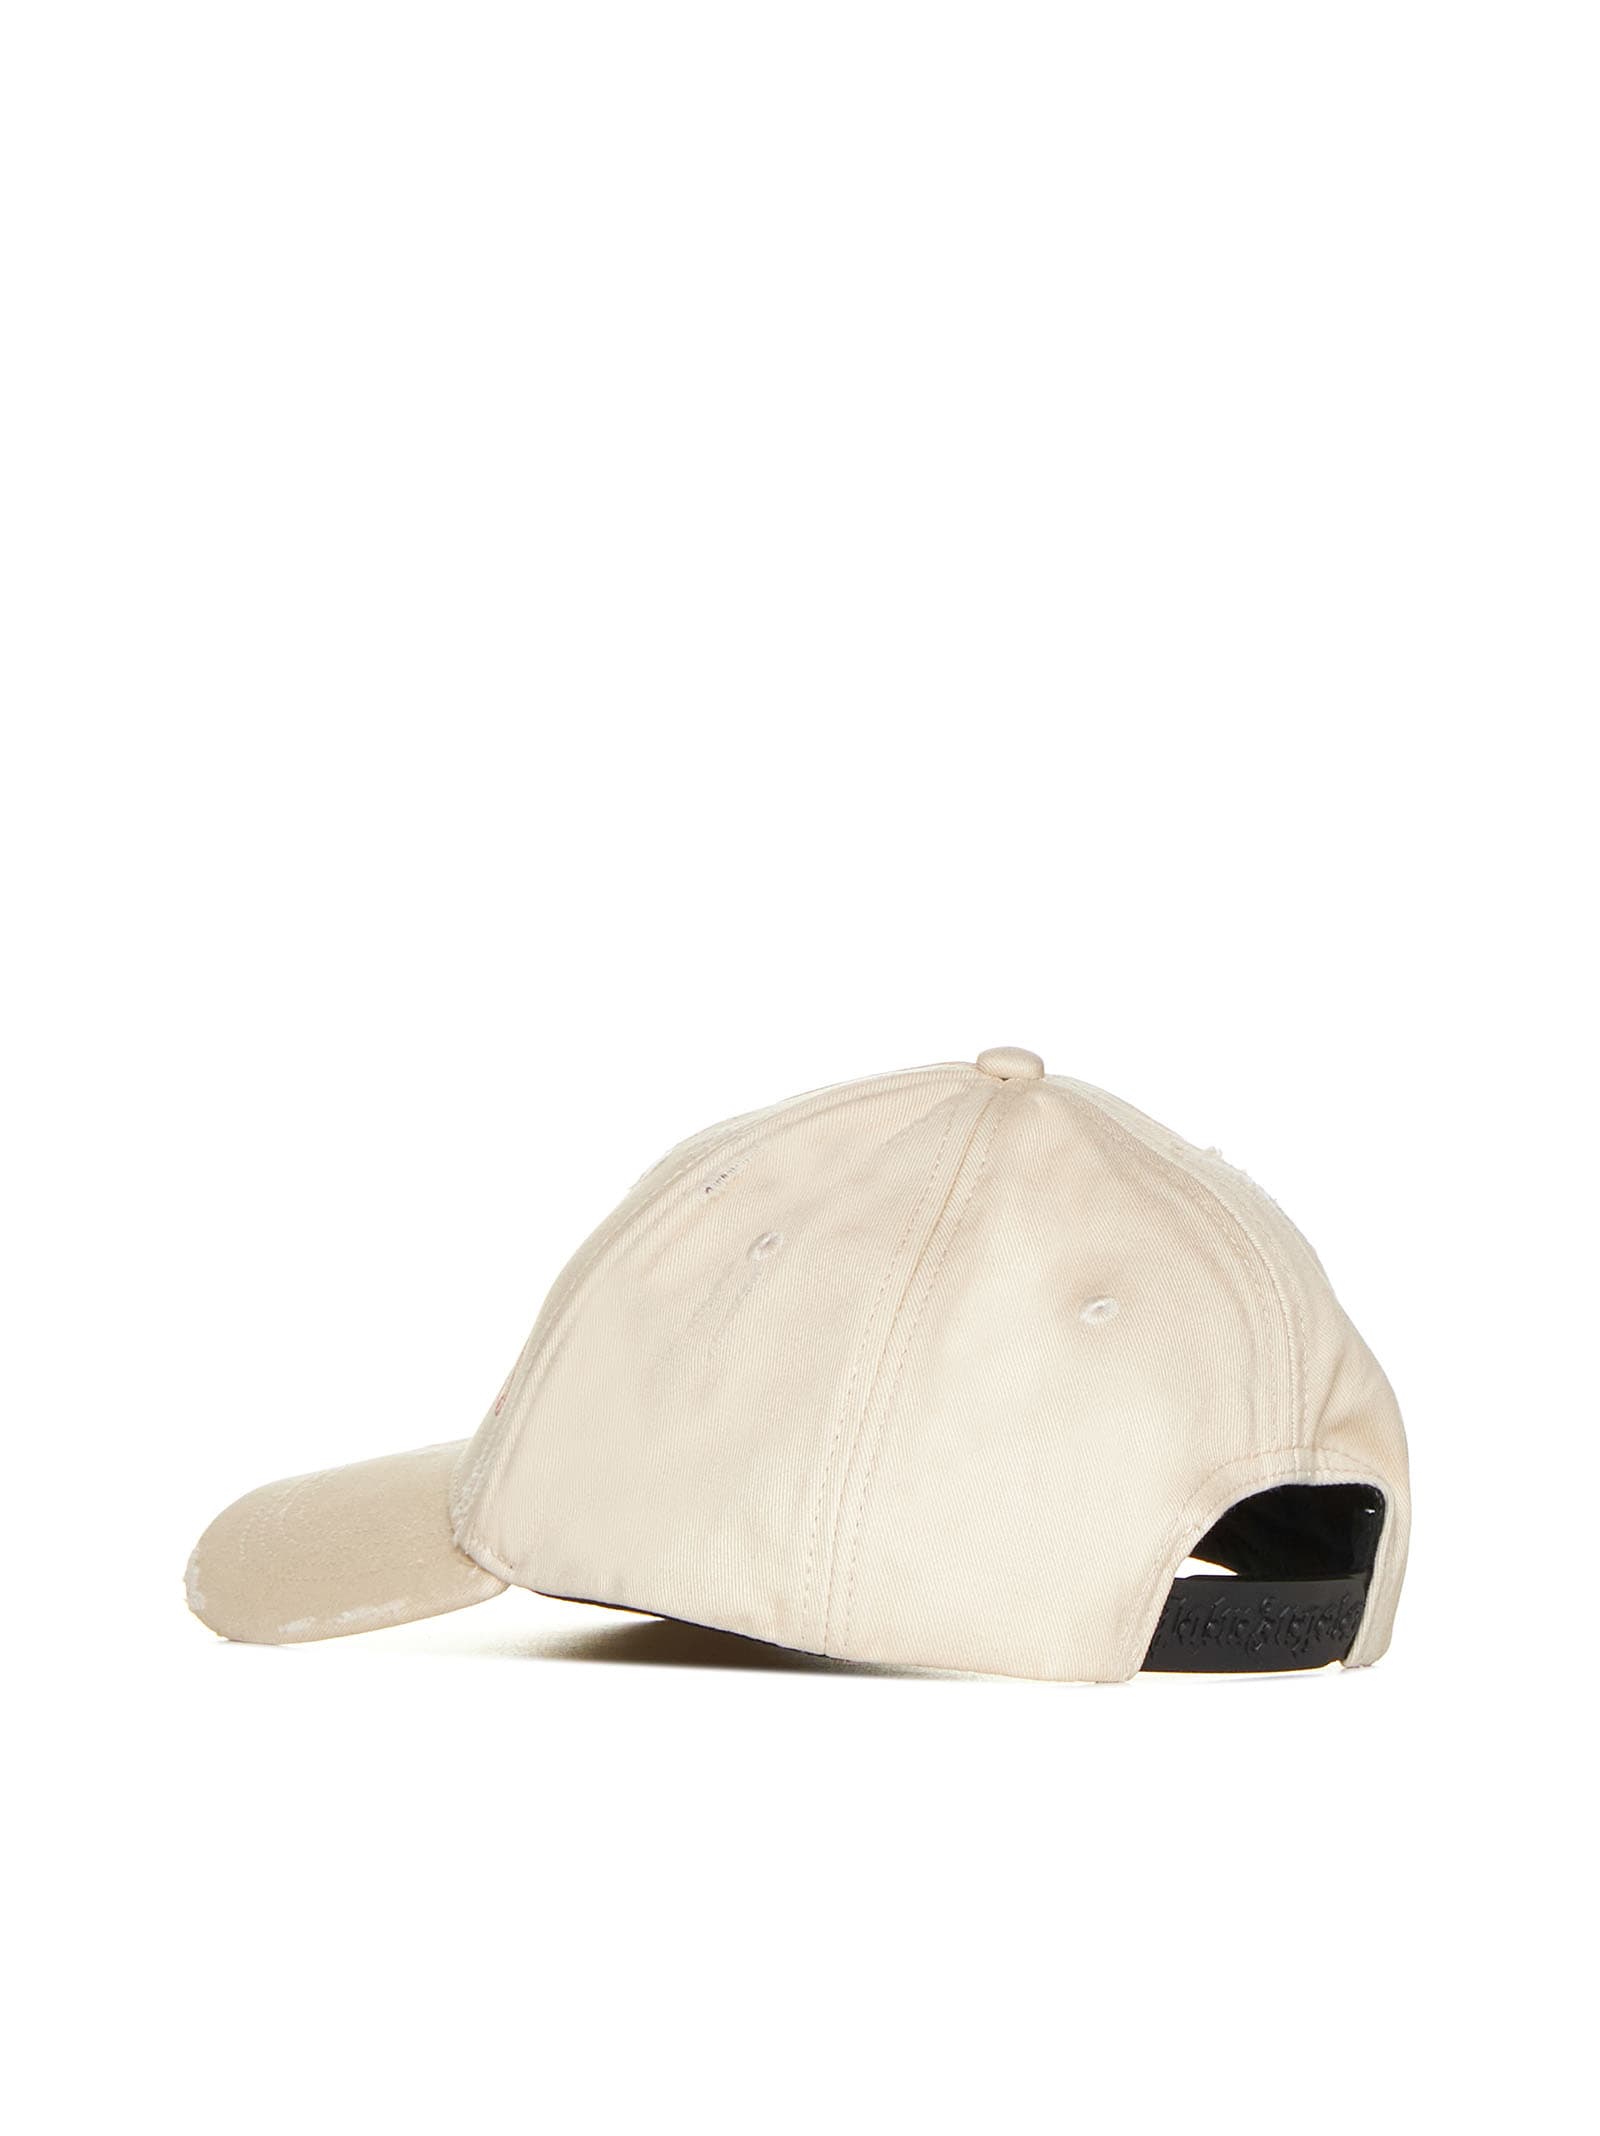 Shop Palm Angels Hat In Off White Red